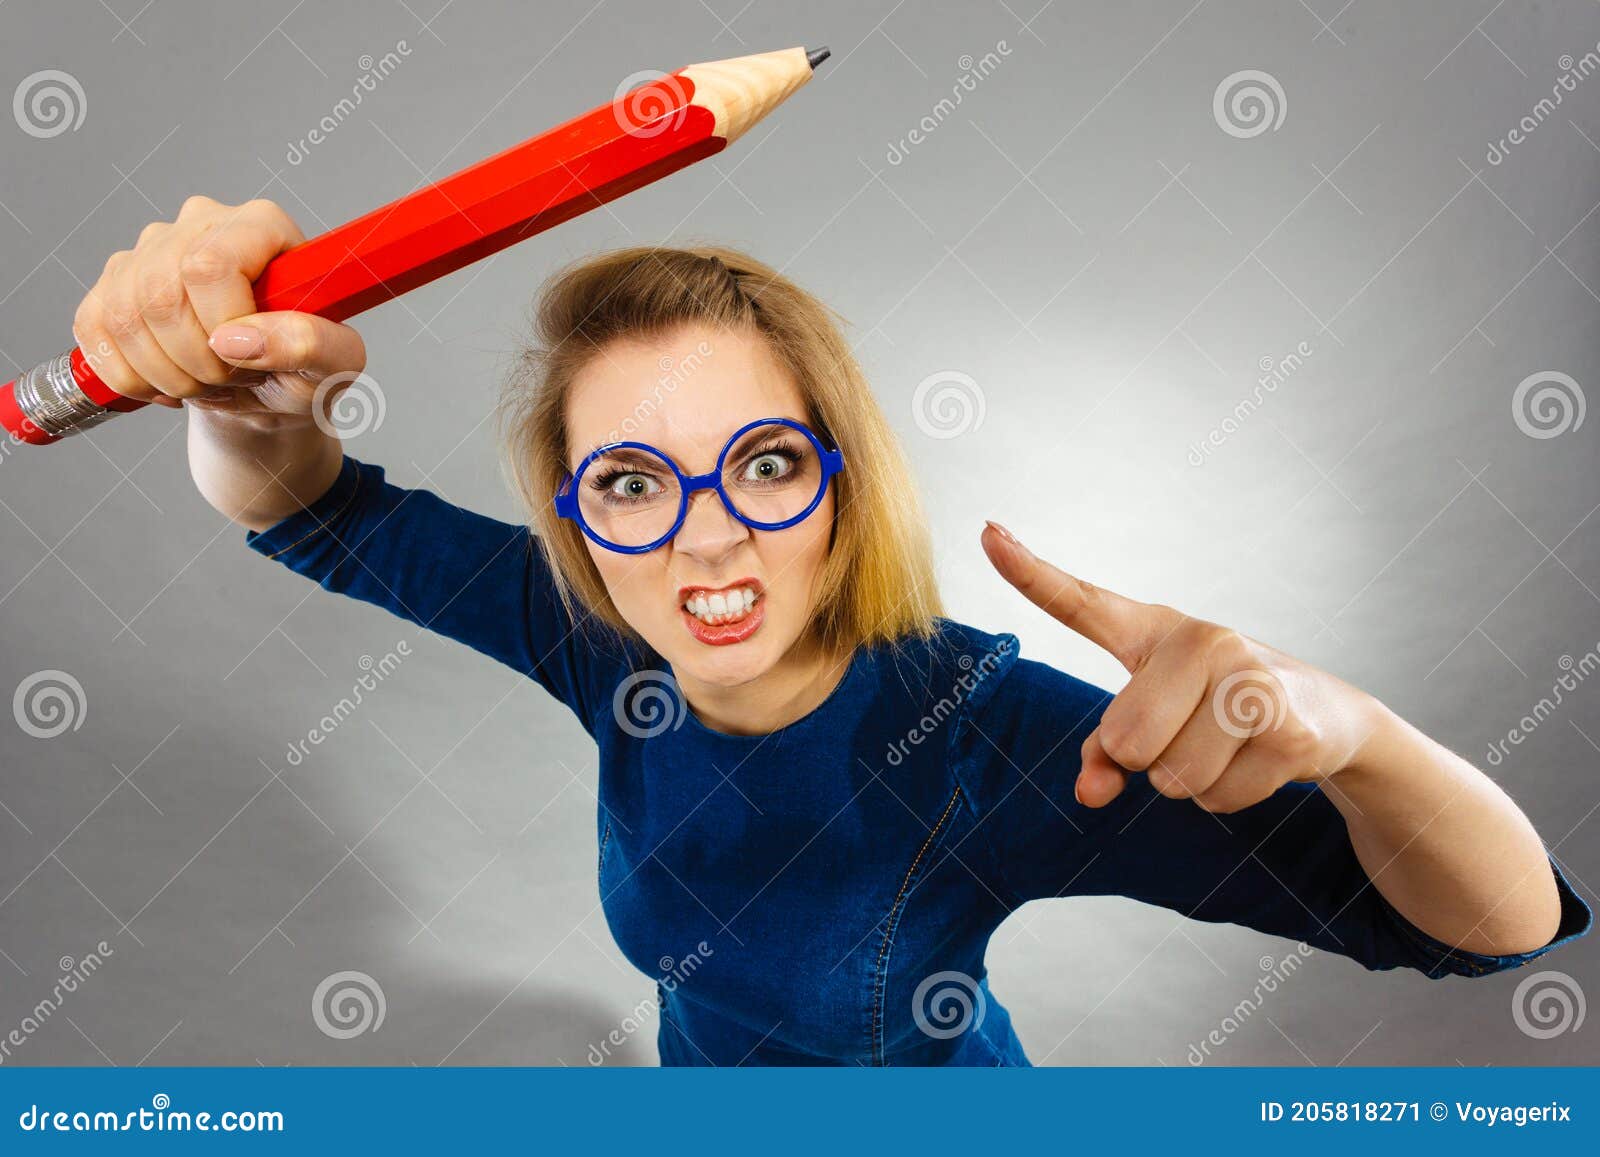 Angry Woman Holds Big Pencil in Hand Stock Image - Image of problem,  accountant: 205818271